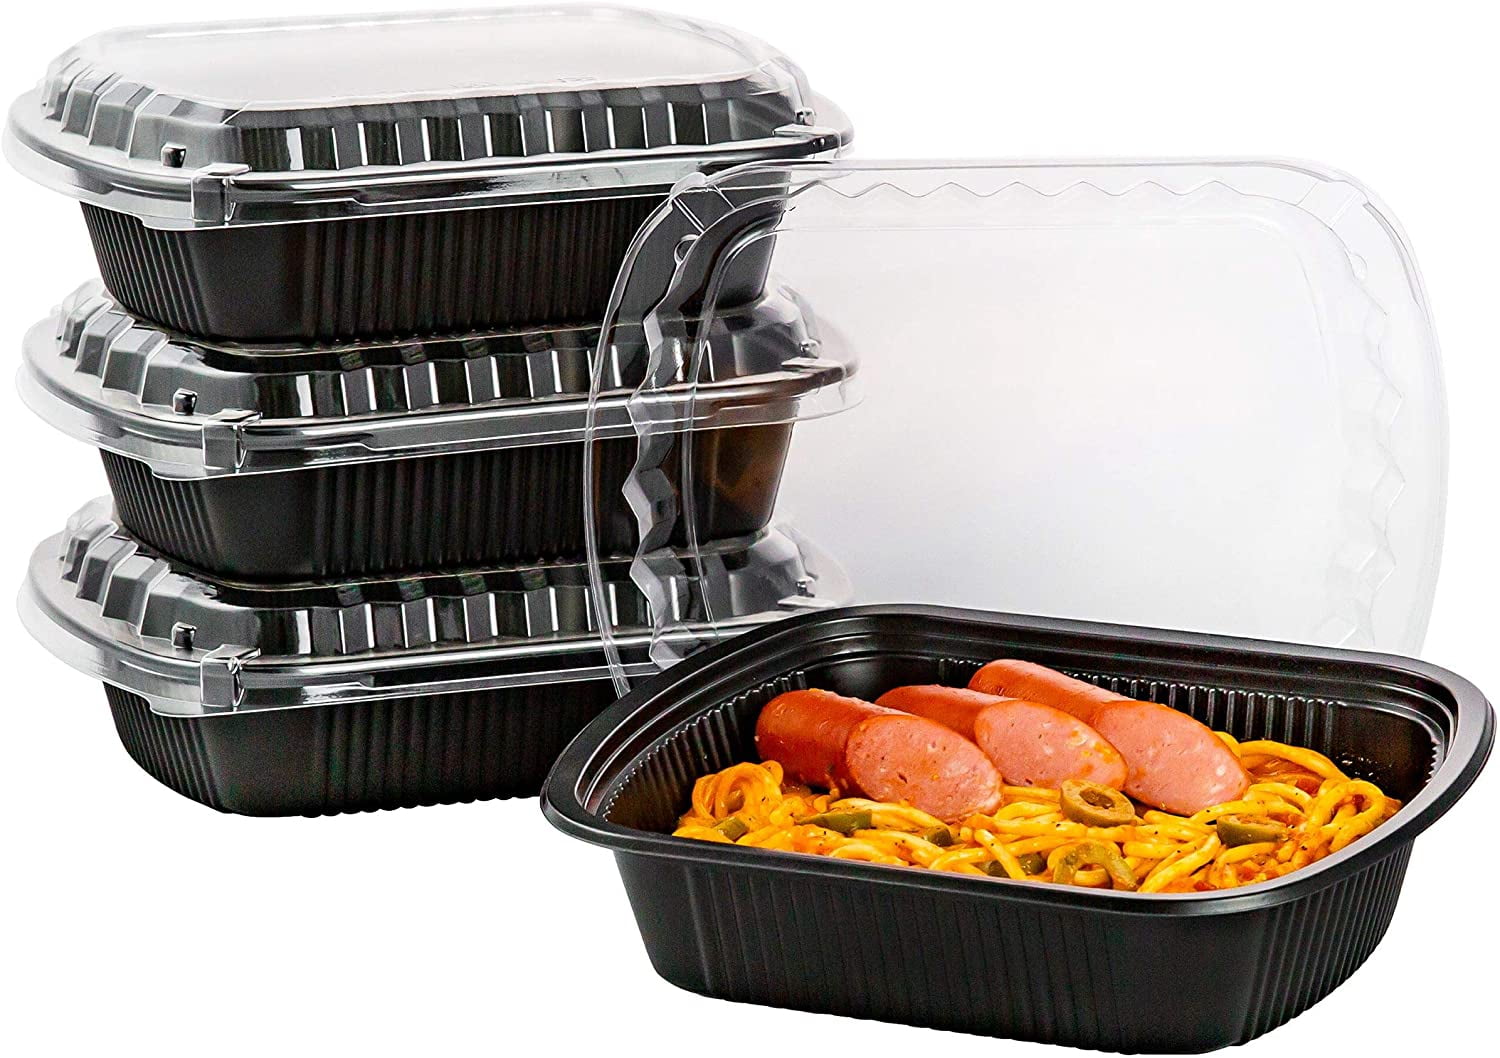 100 Sets Disposable Meal Prep Food Containers 28oz with Lid